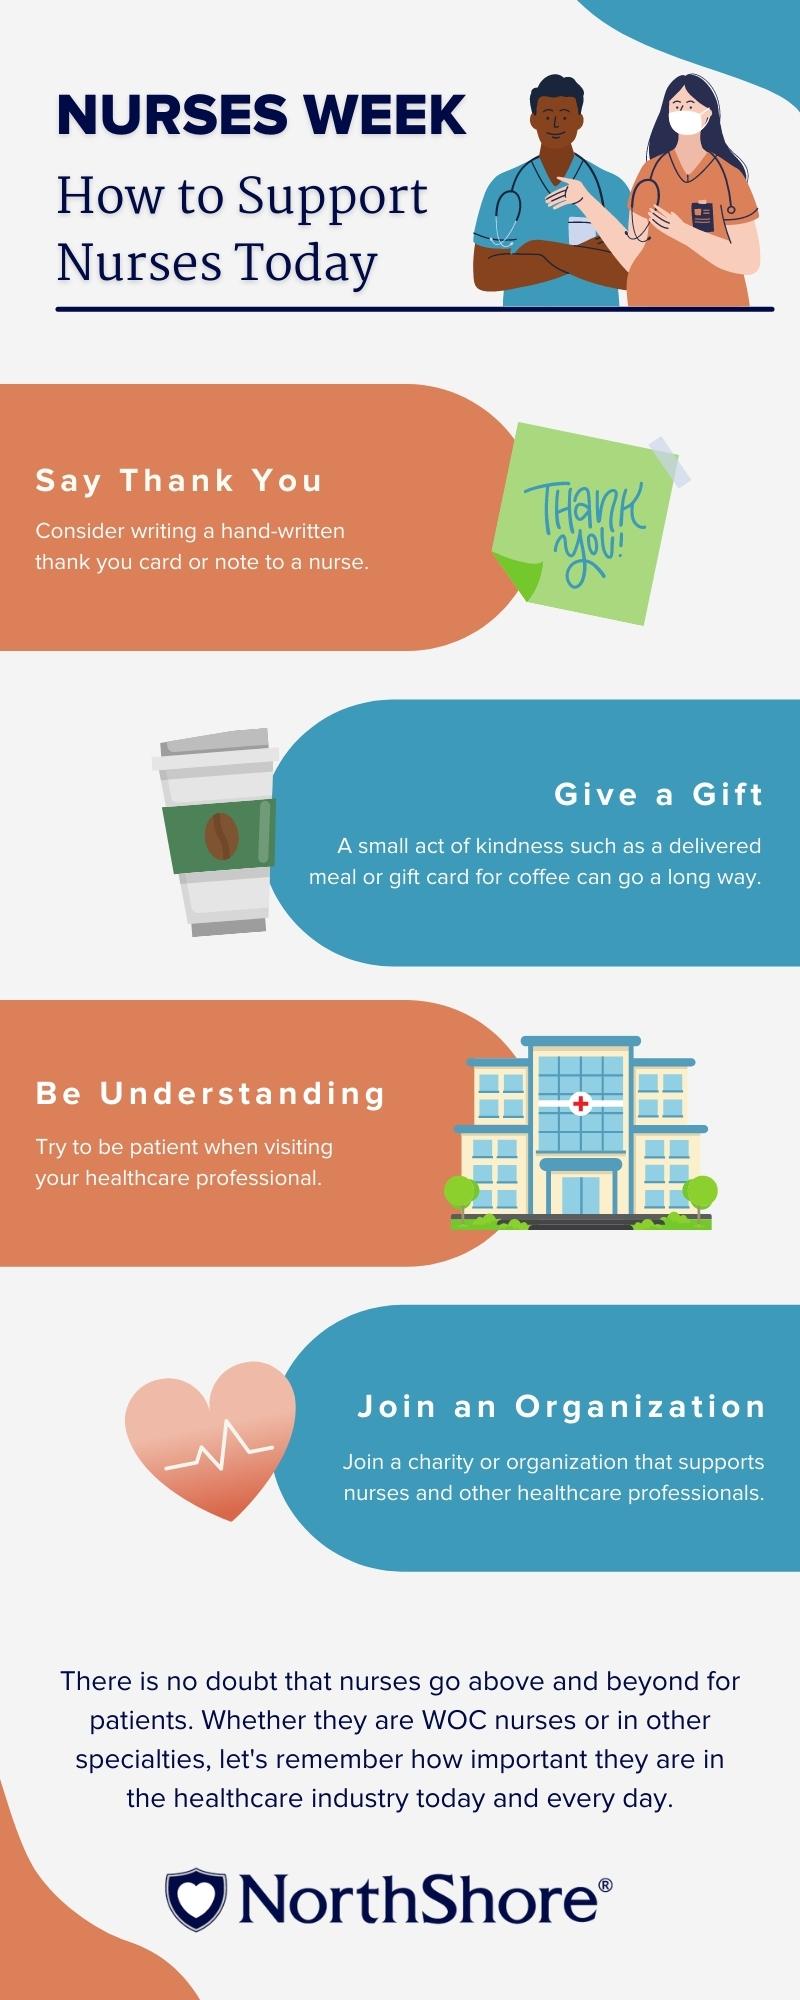 How to Support Nurses